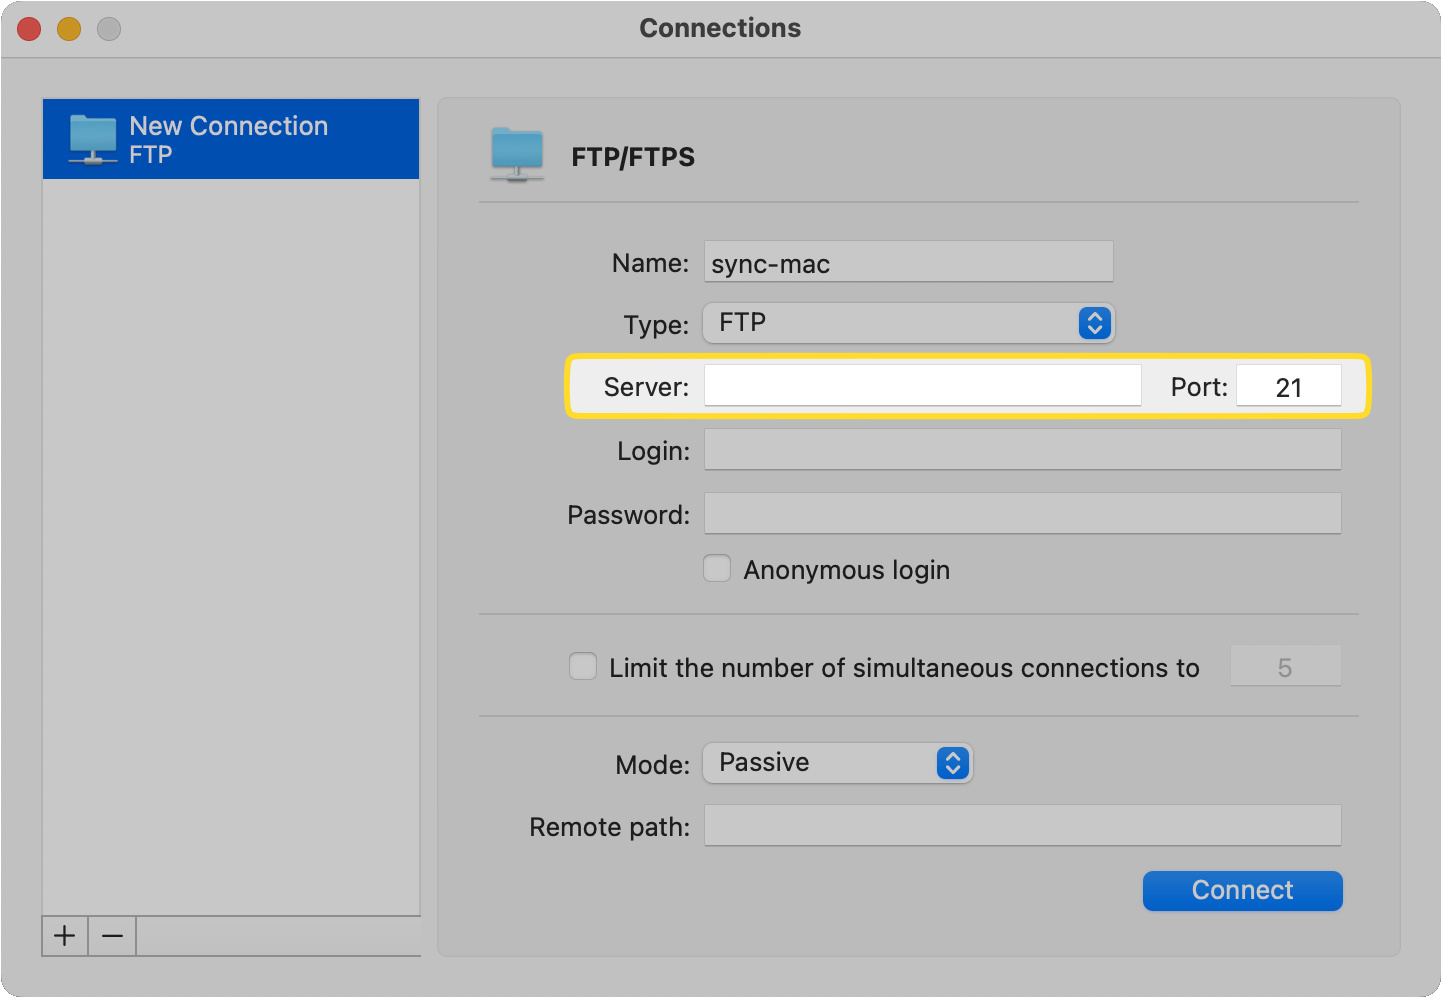 The Port field of the new FTP connection is highlighted